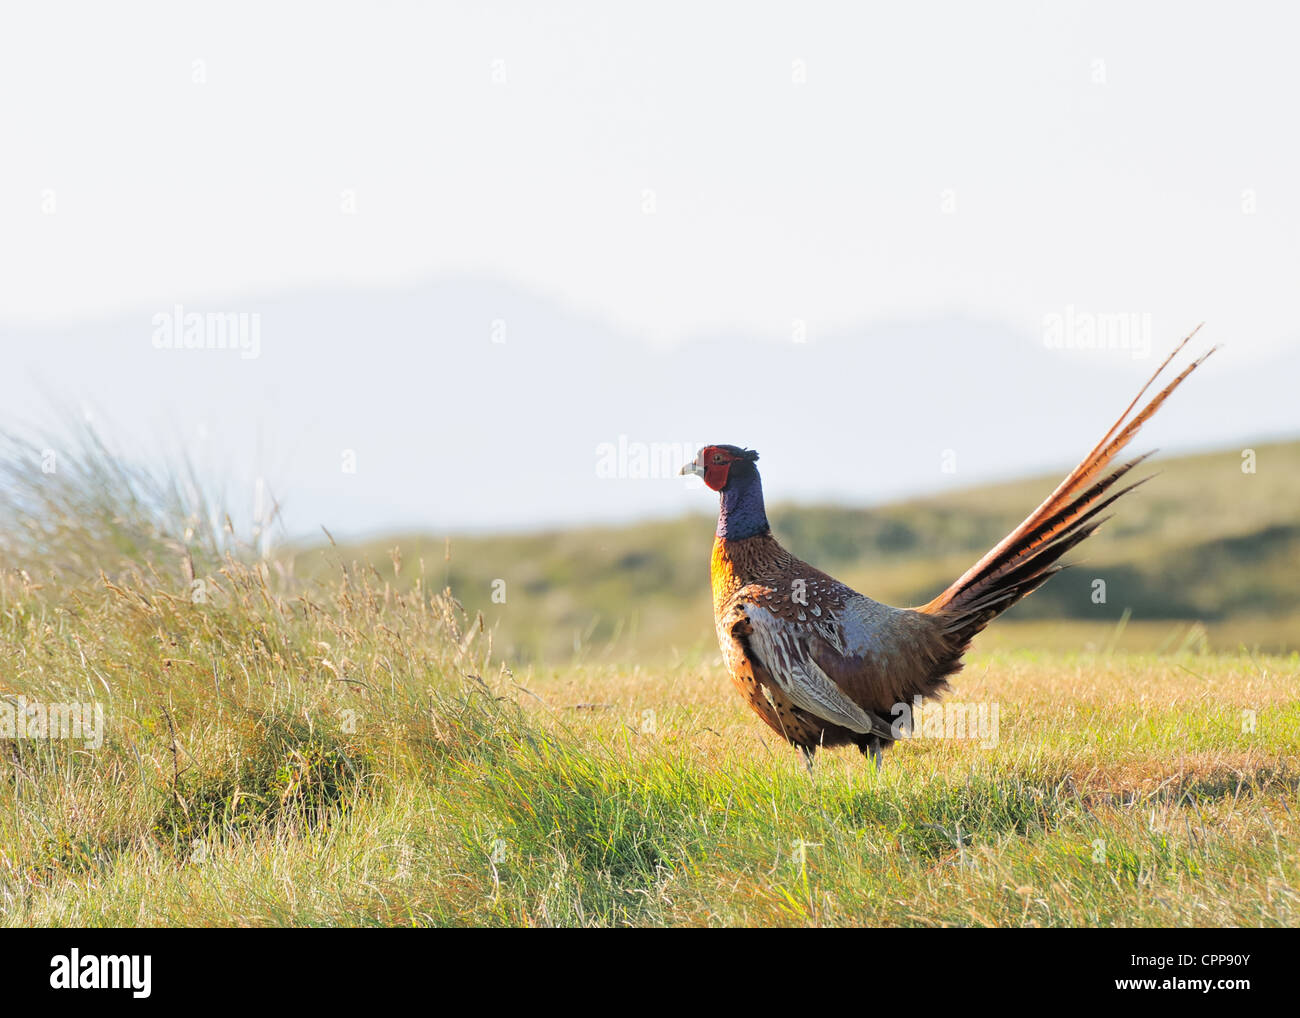 A pheasant (Phasianinae) roaming the Scottish countryside near Turnberry golf course in Scotland. Stock Photo